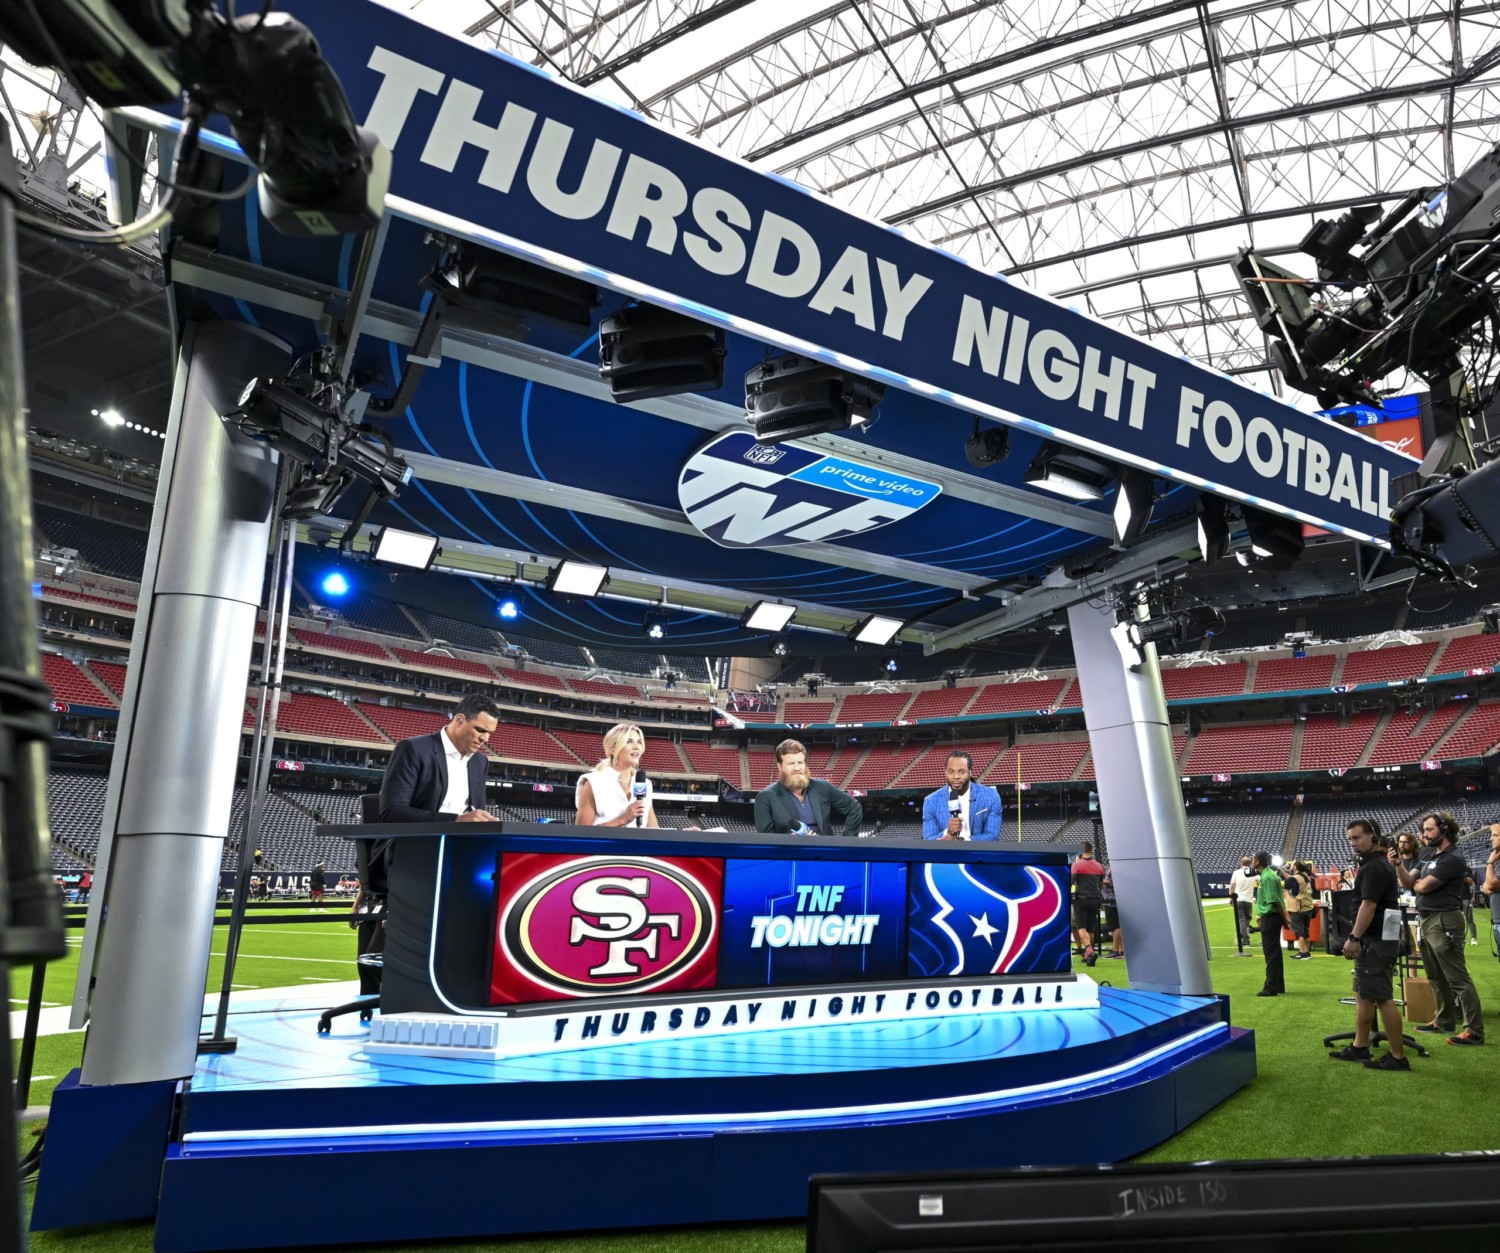 what two nfl teams play tonight thursday night football